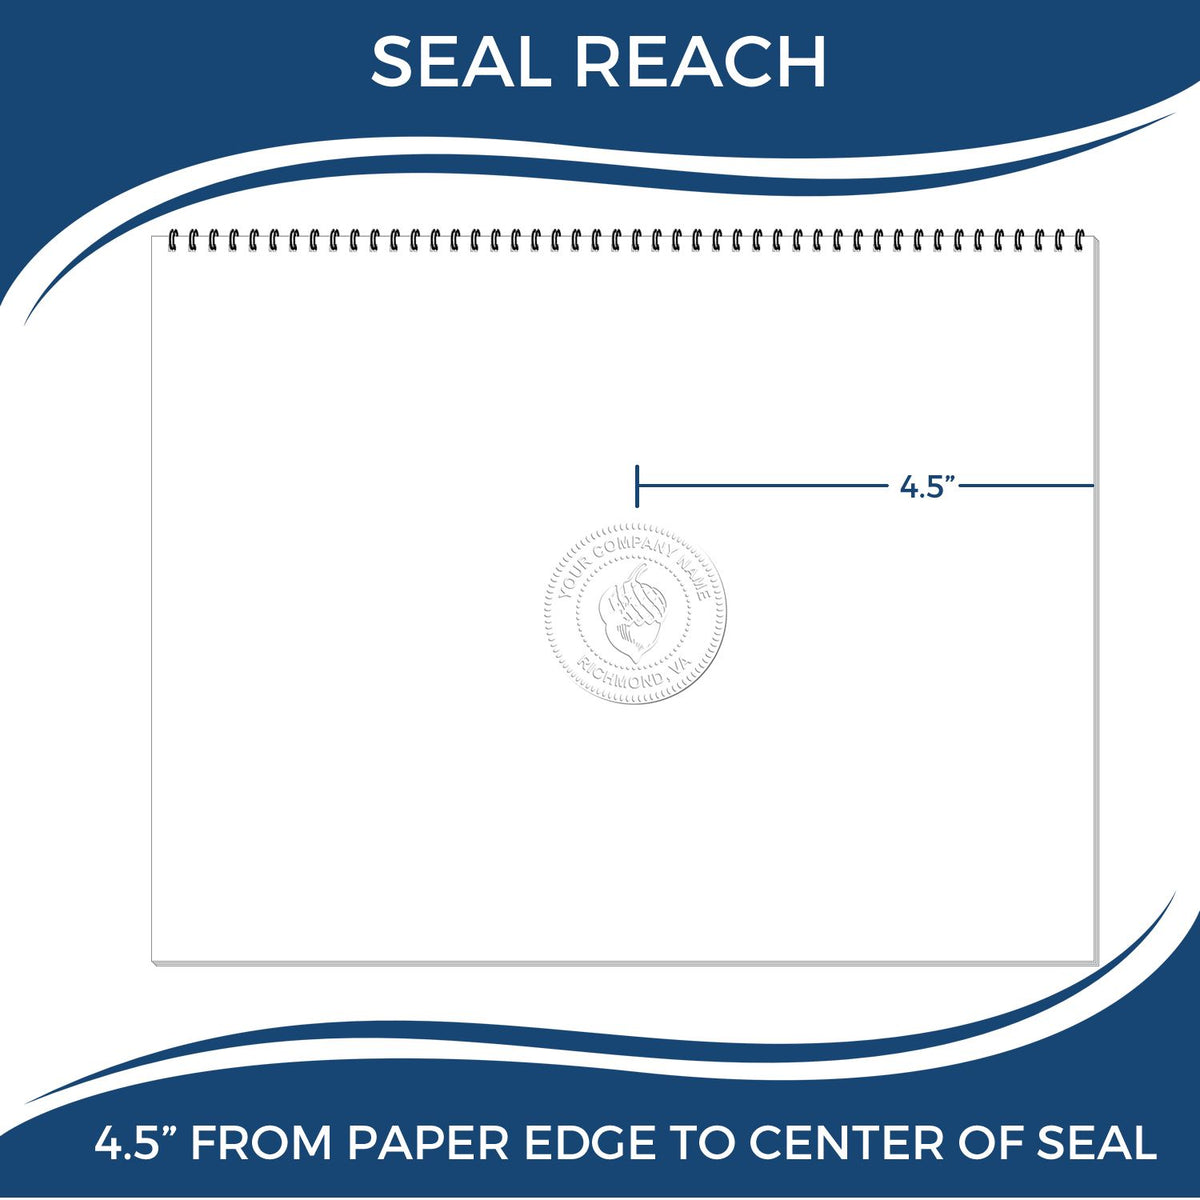 An infographic showing the seal reach which is represented by a ruler and a miniature seal image of the Extended Long Reach Minnesota Surveyor Embosser